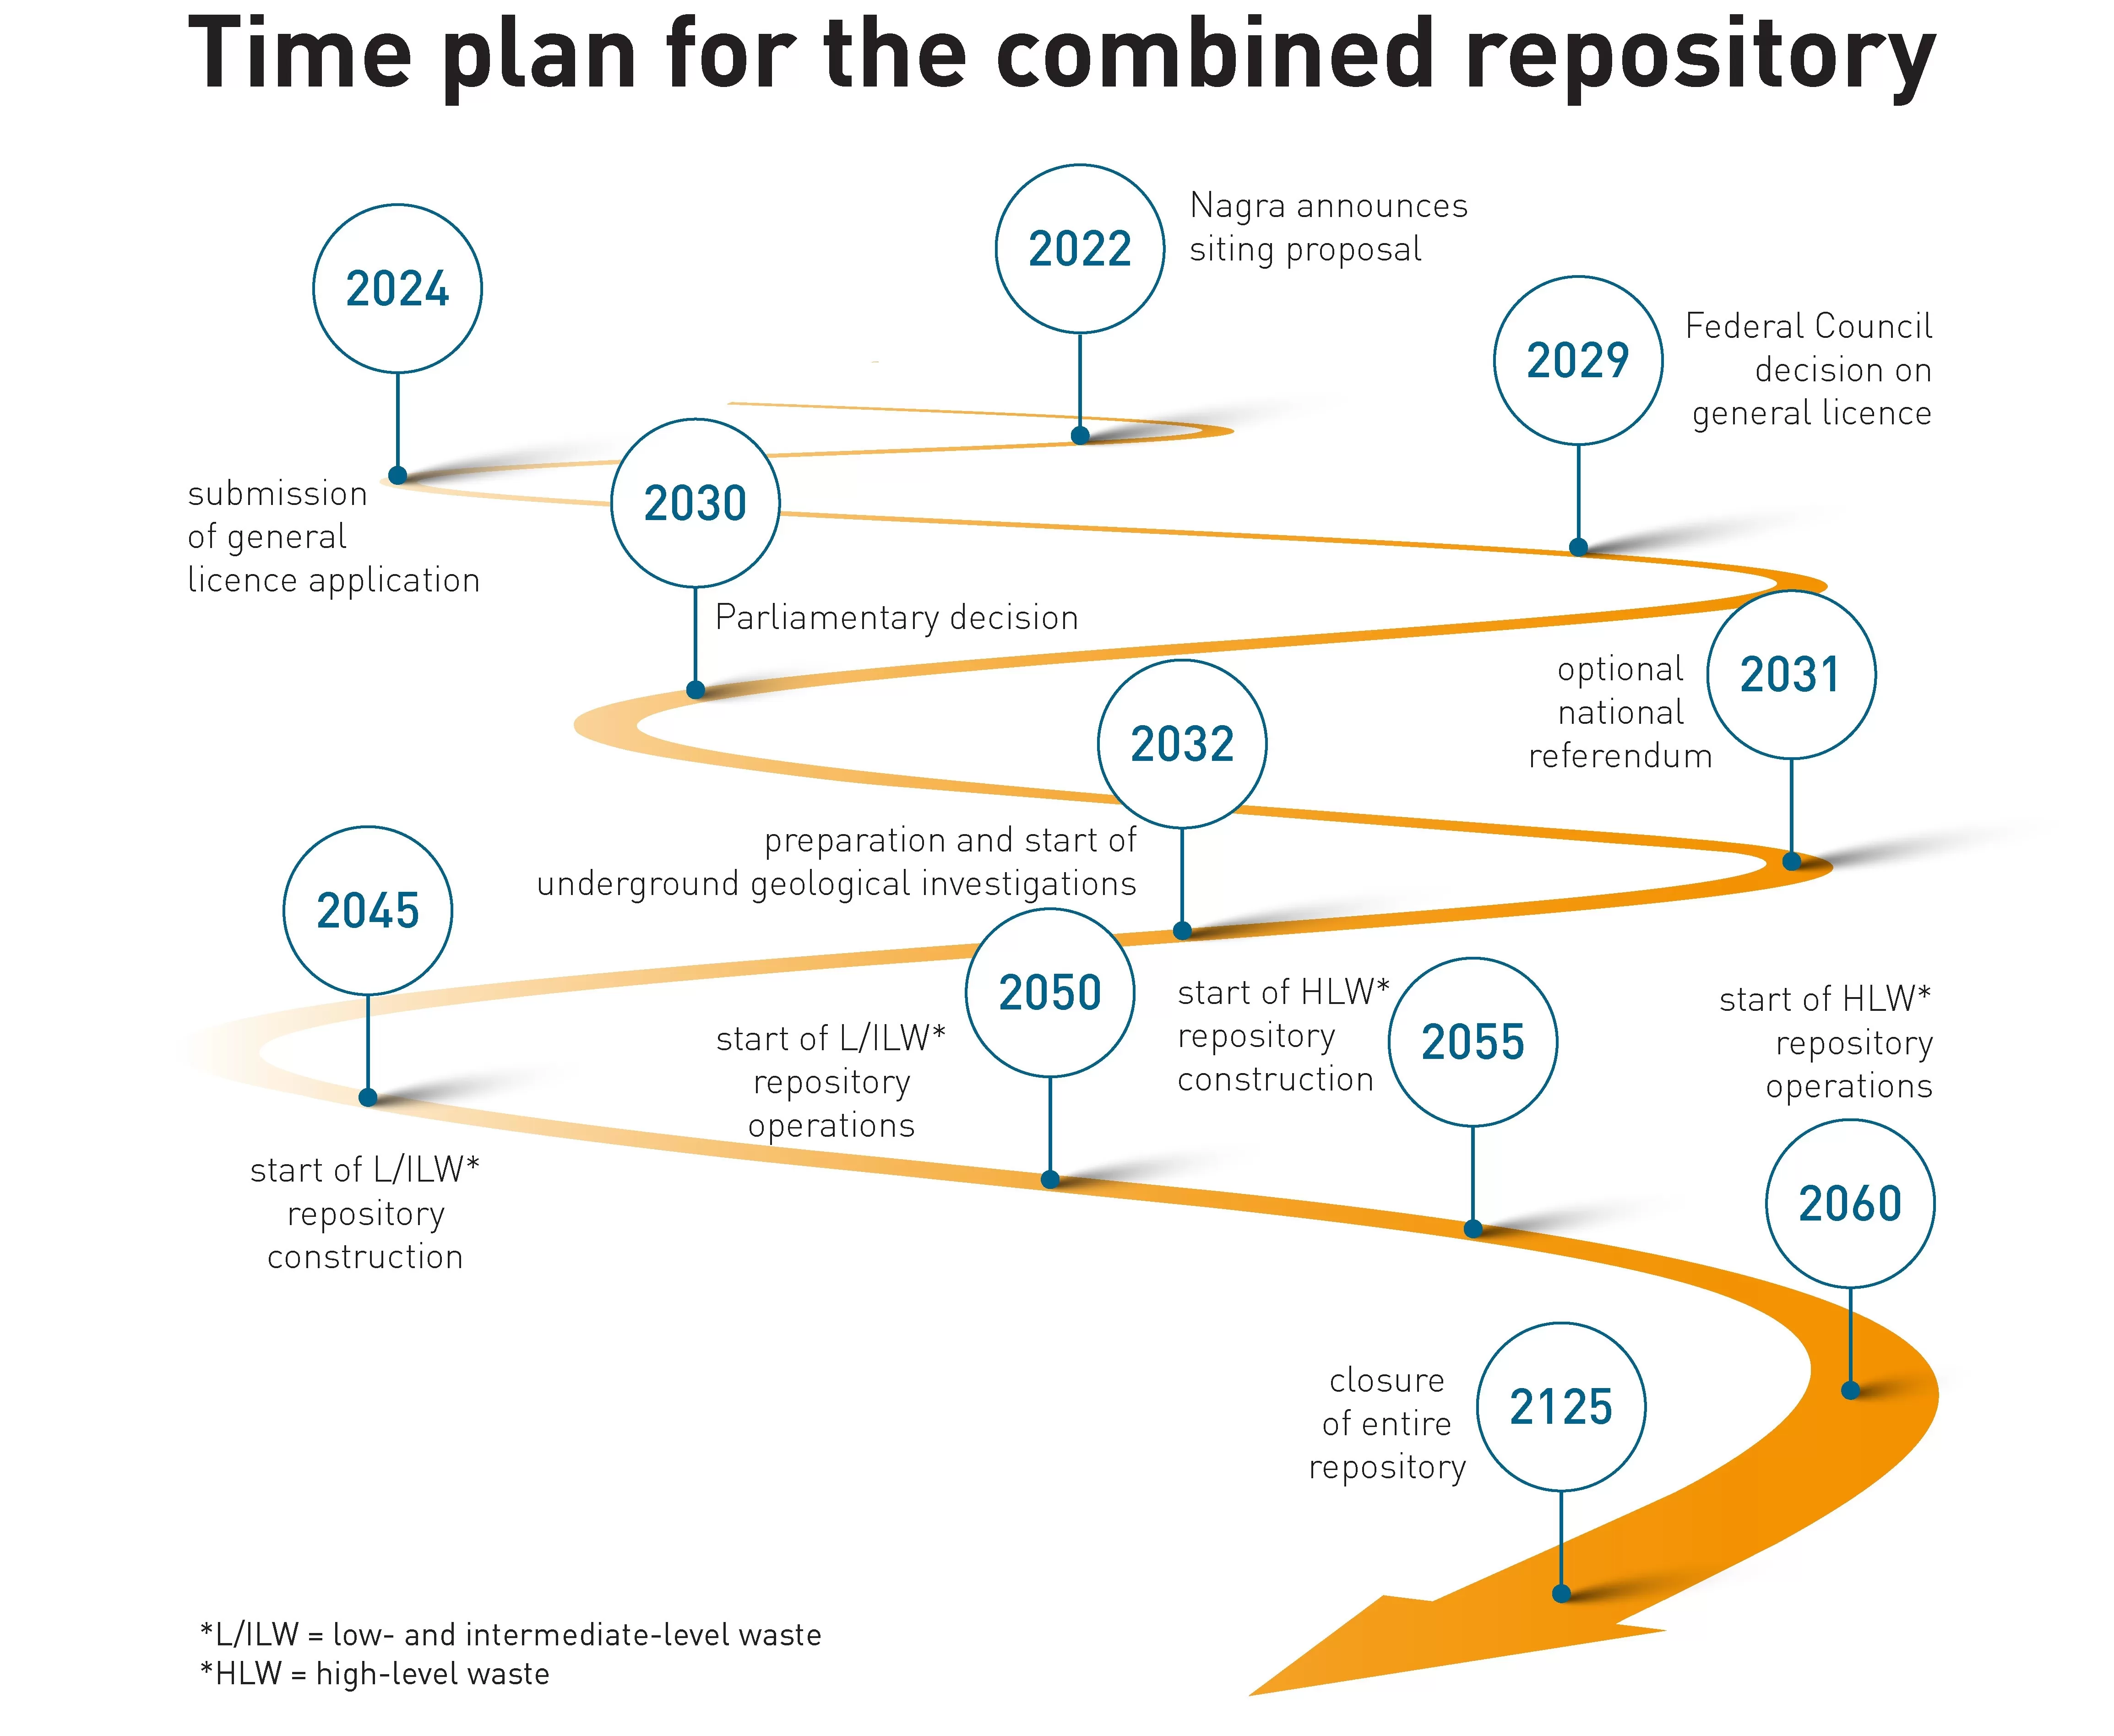 What are the next steps in the deep geological disposal project? Time schedule for planning, constructing and closing a combined repository.